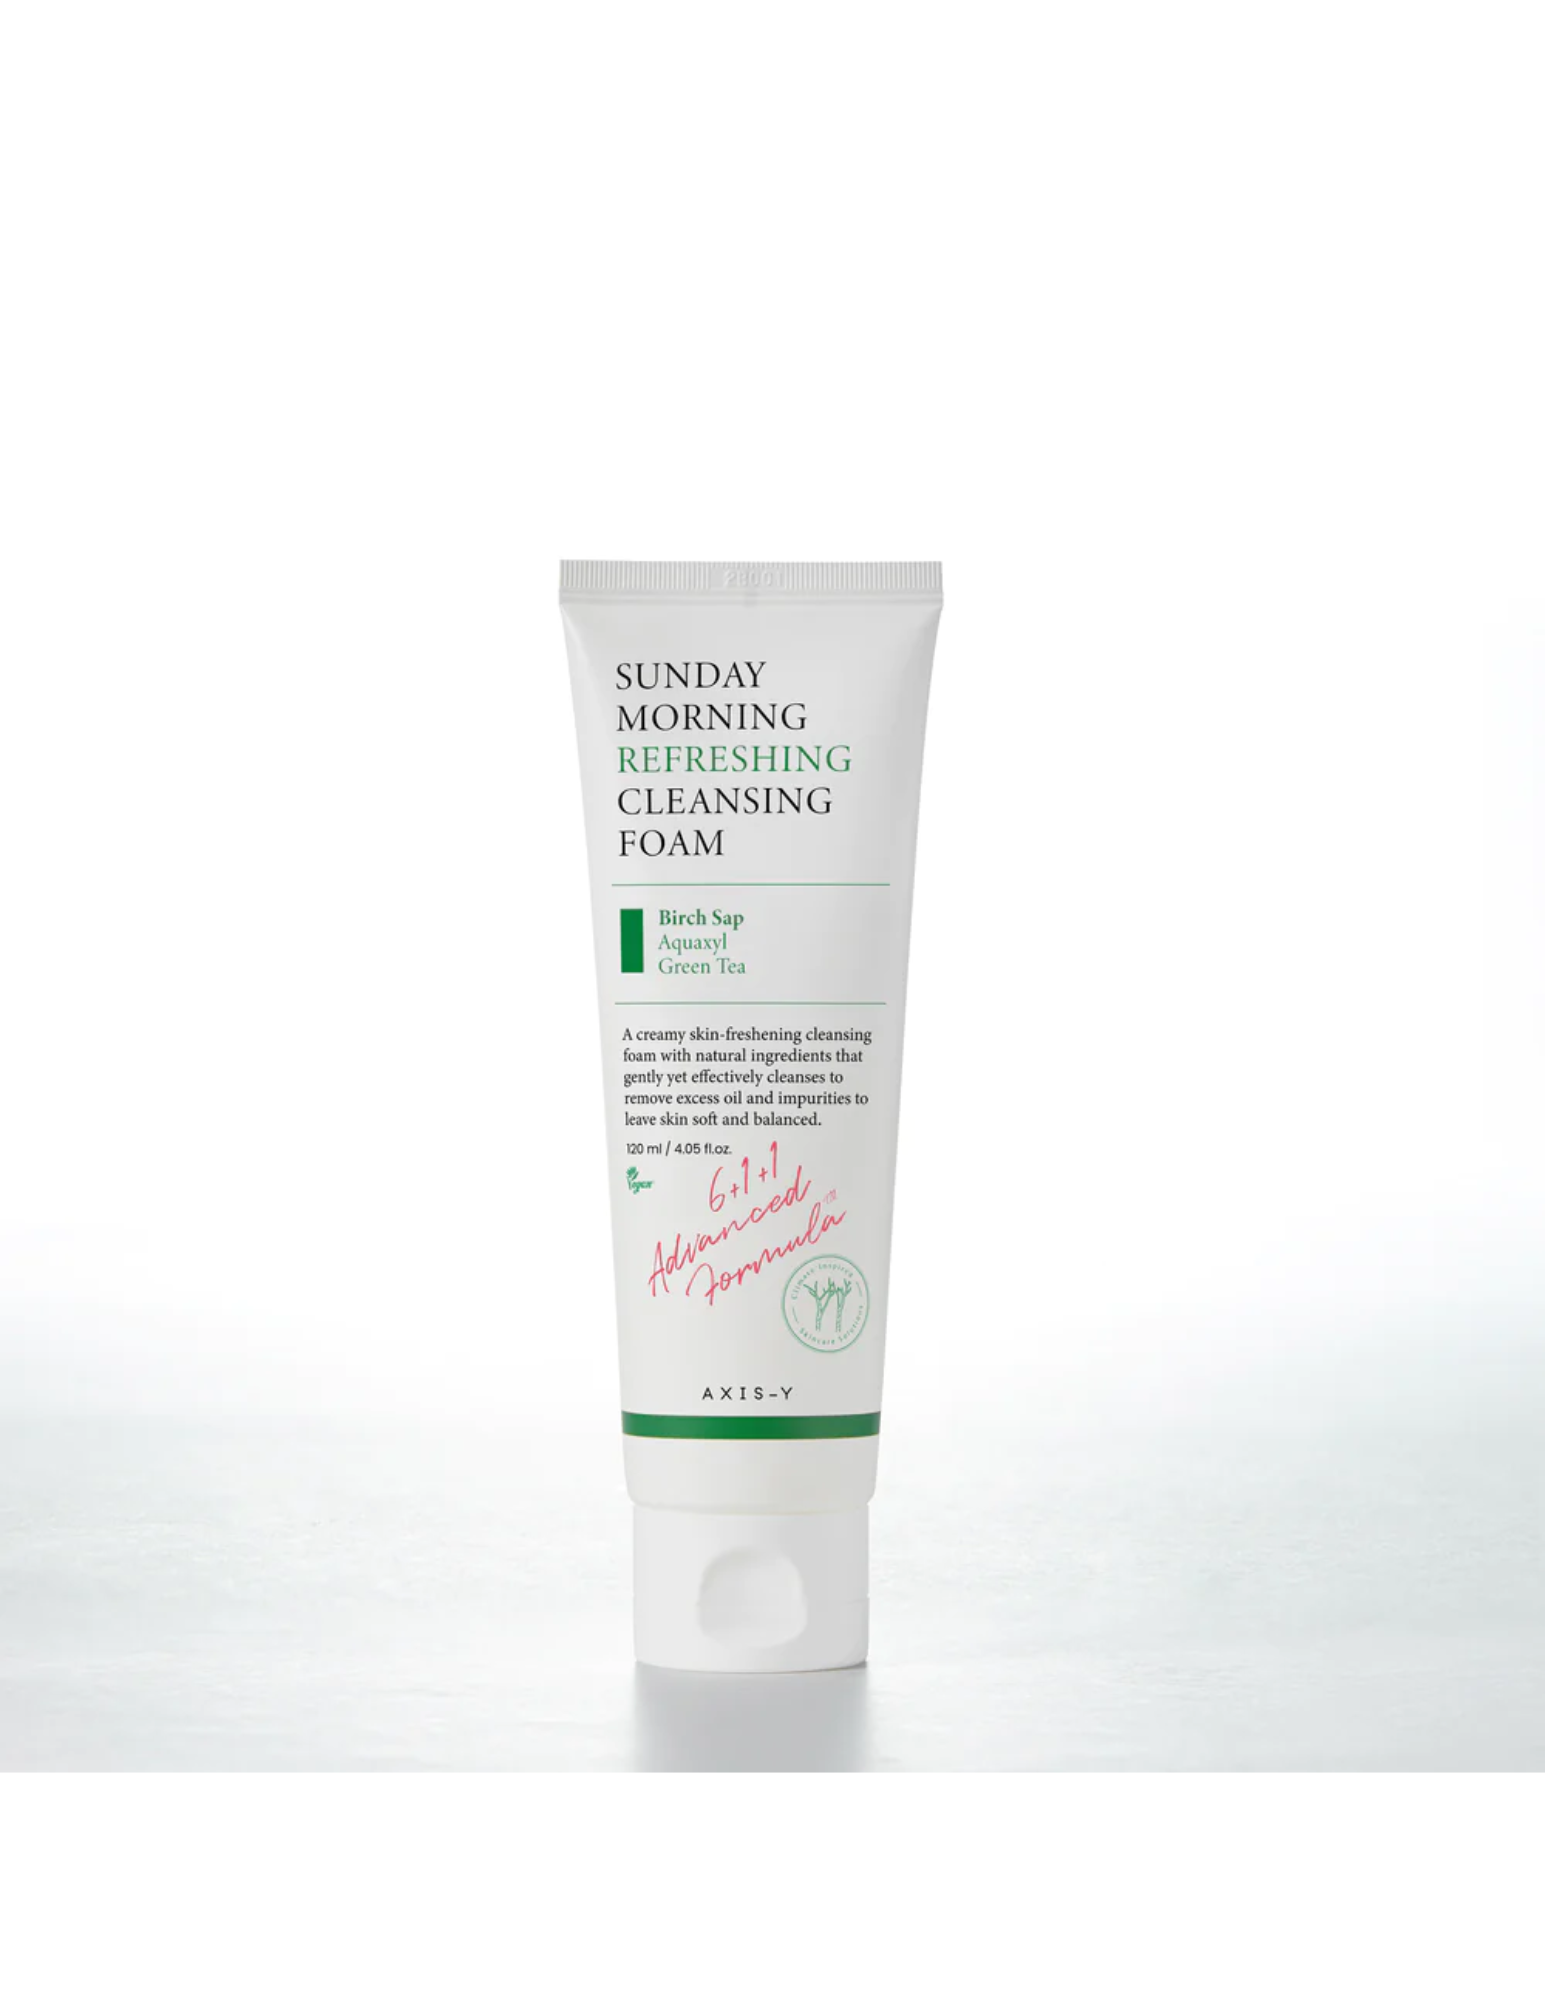 Axis-Y Sunday Morning Refreshing Cleansing Foam